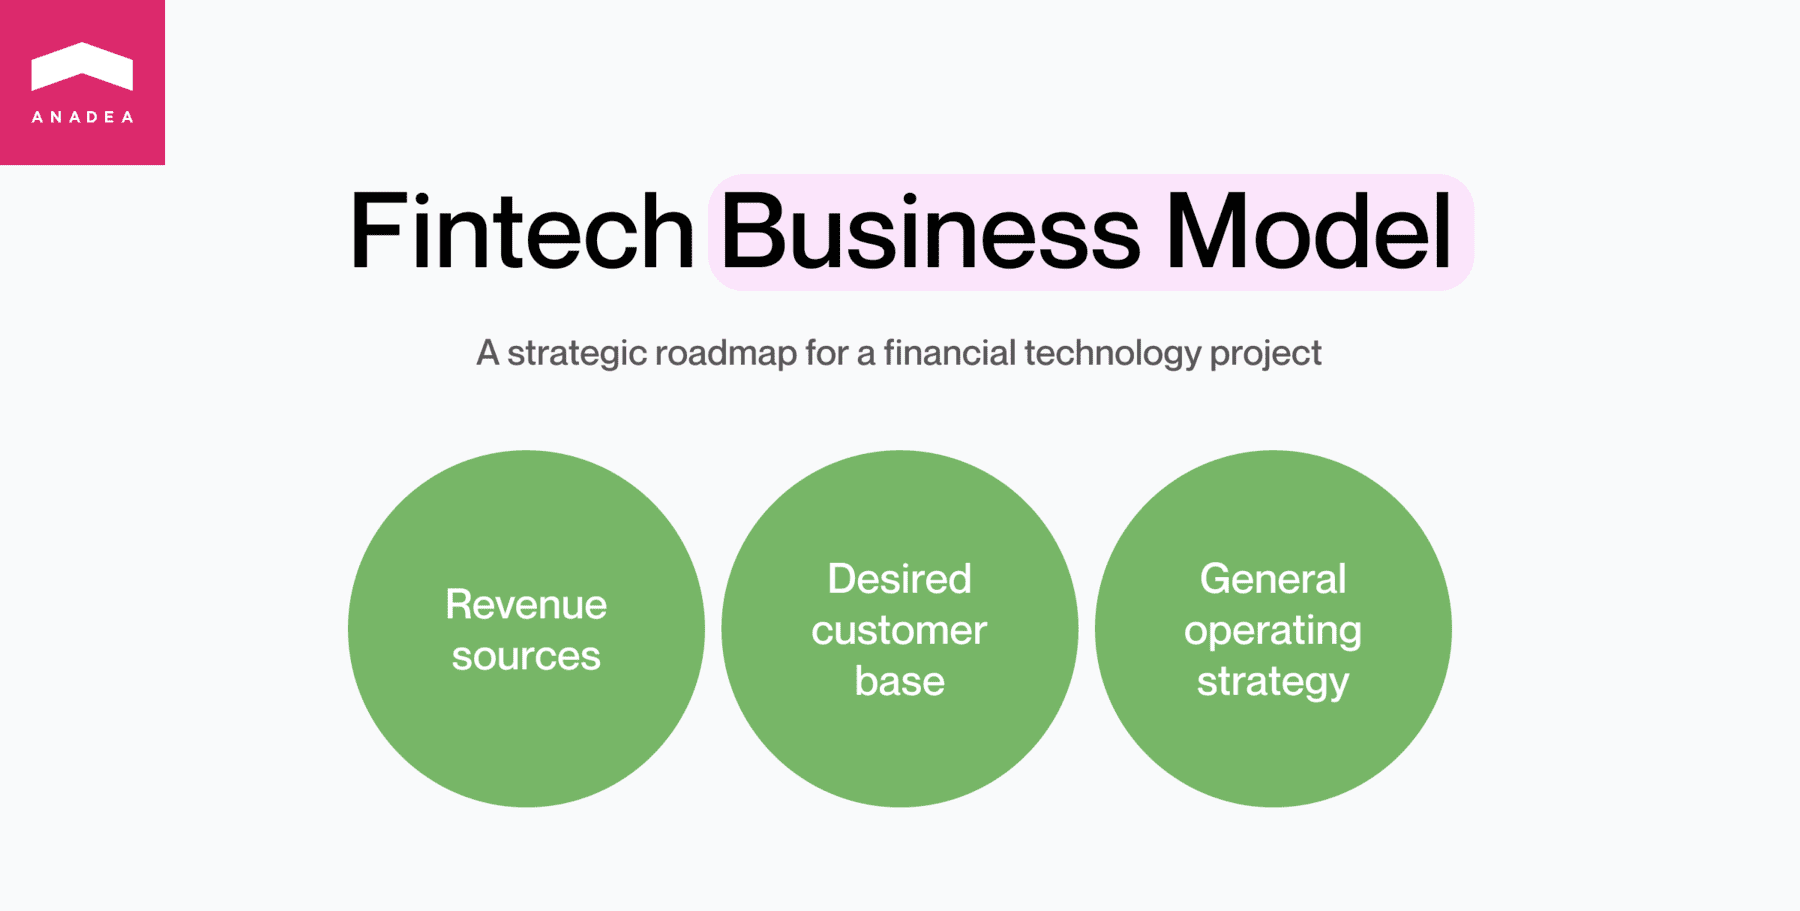 What fintech business model includes